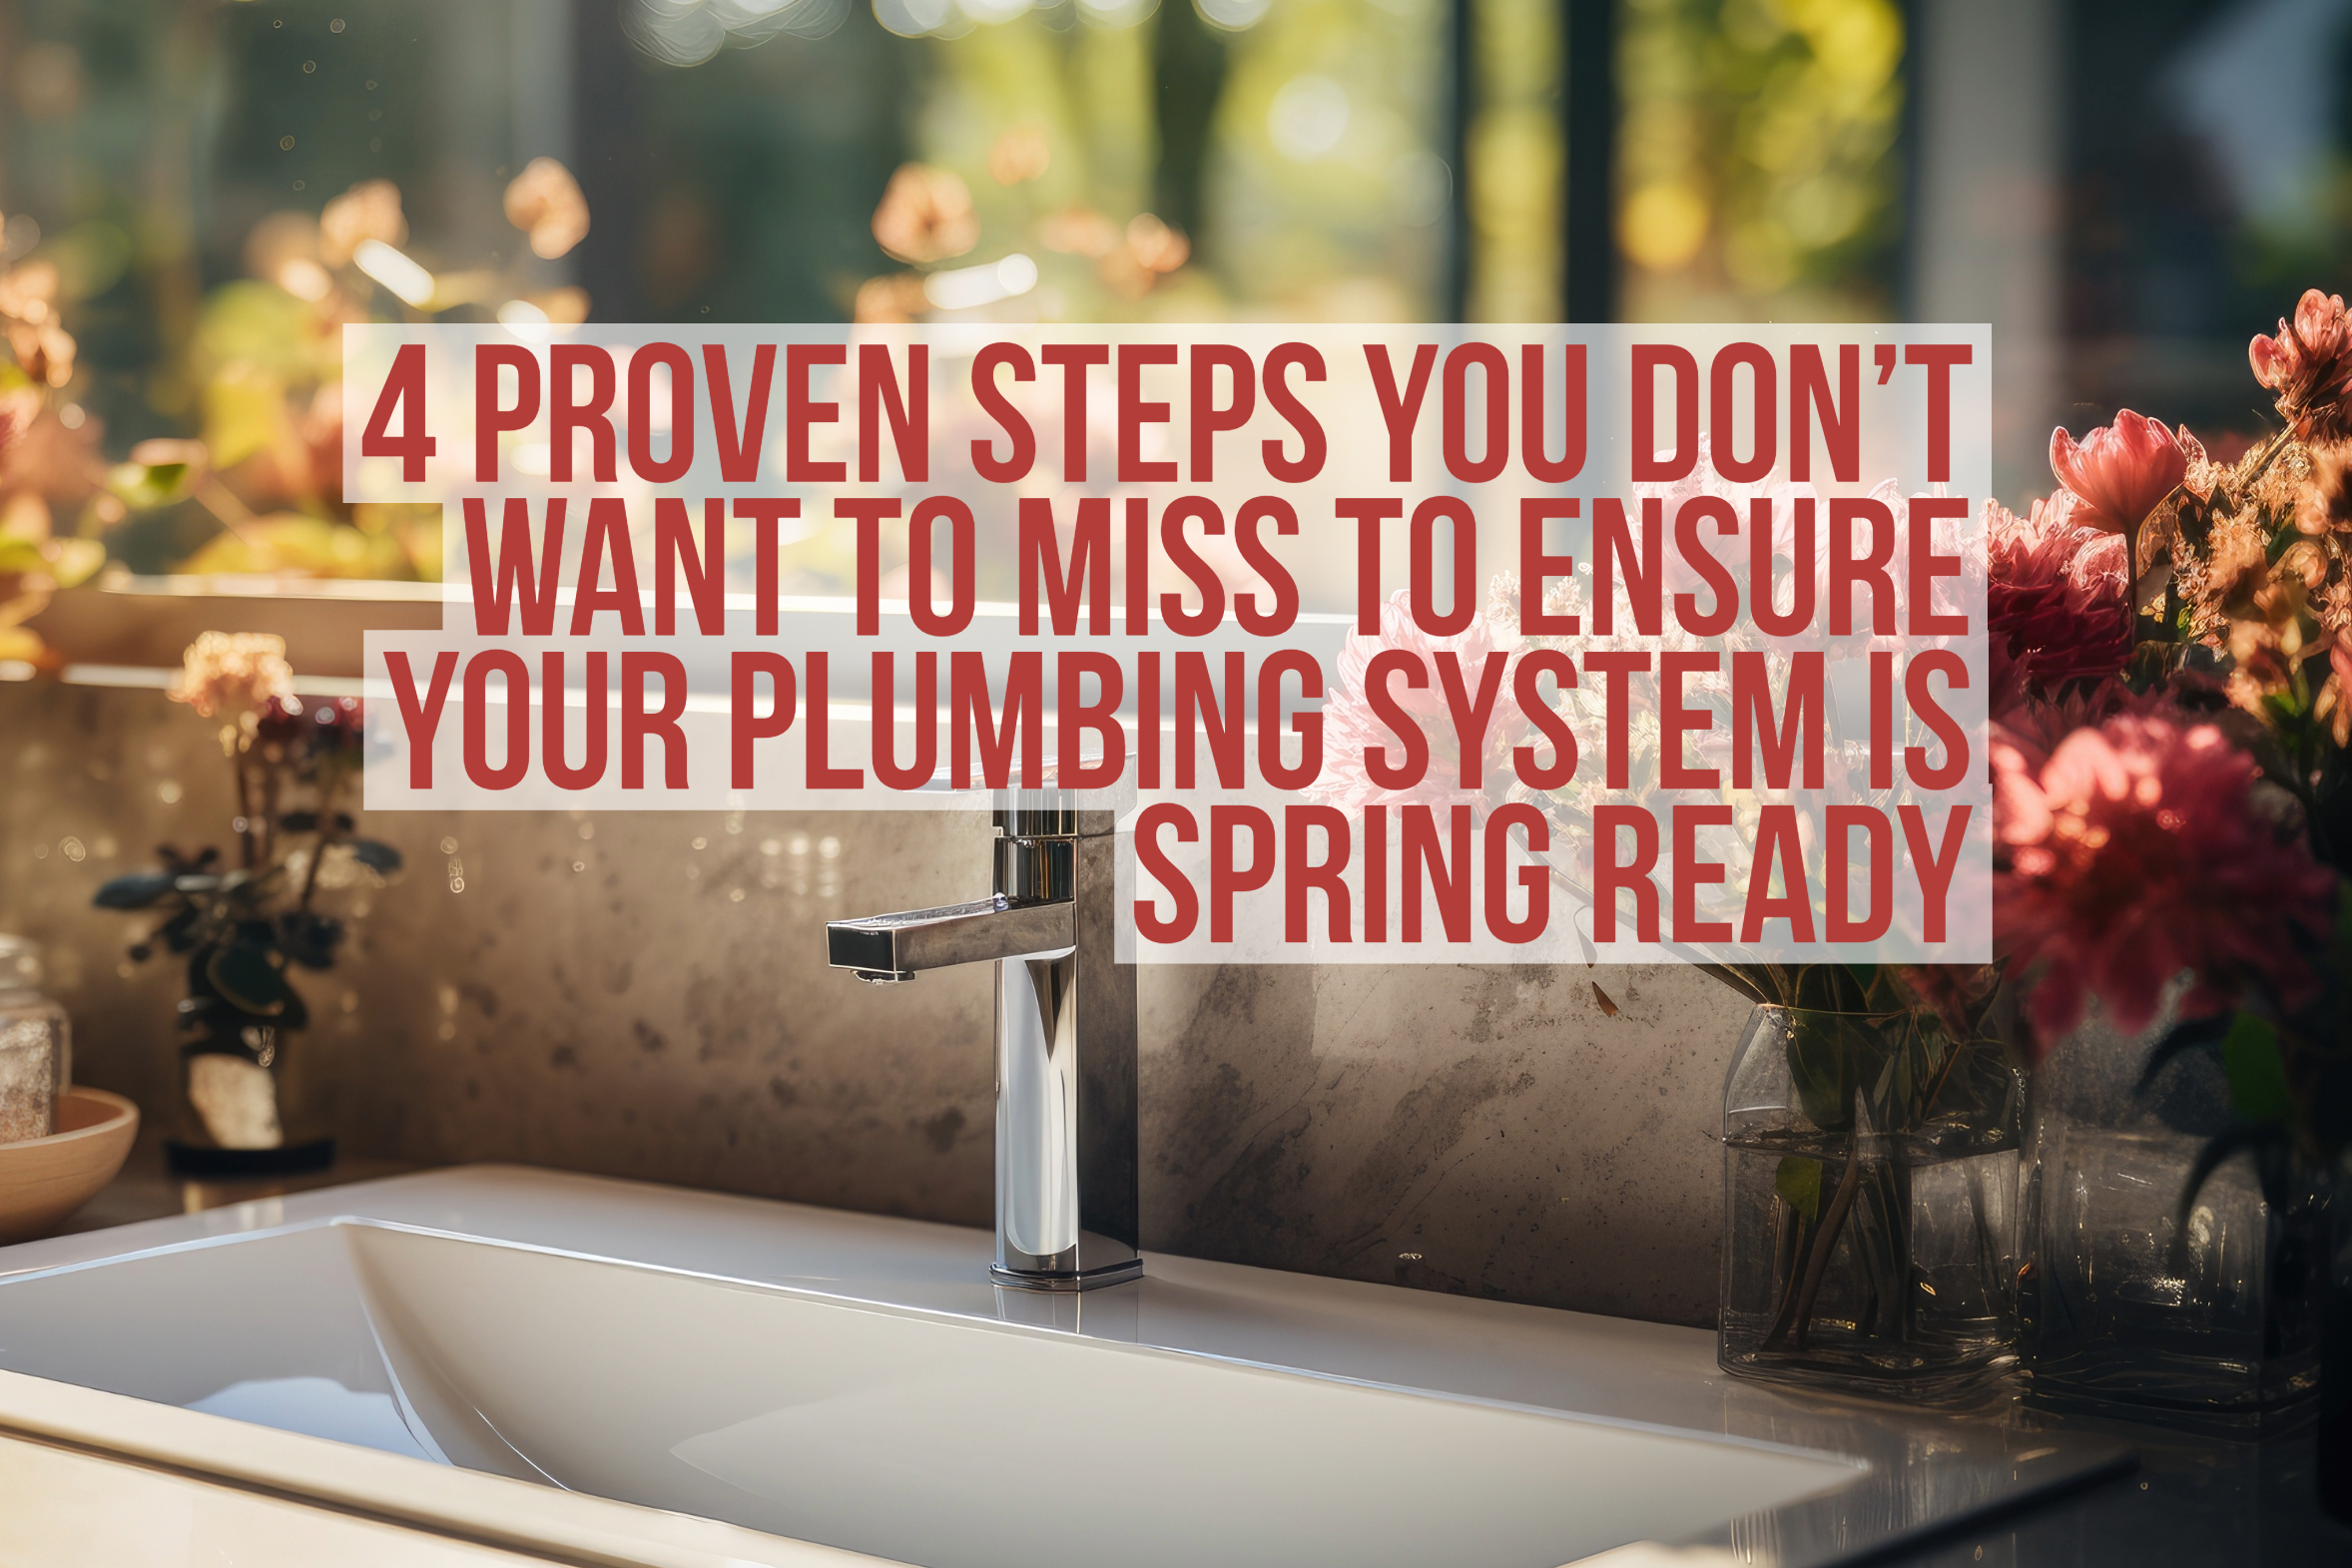 Steps you can take to make your plumbing system spring ready!